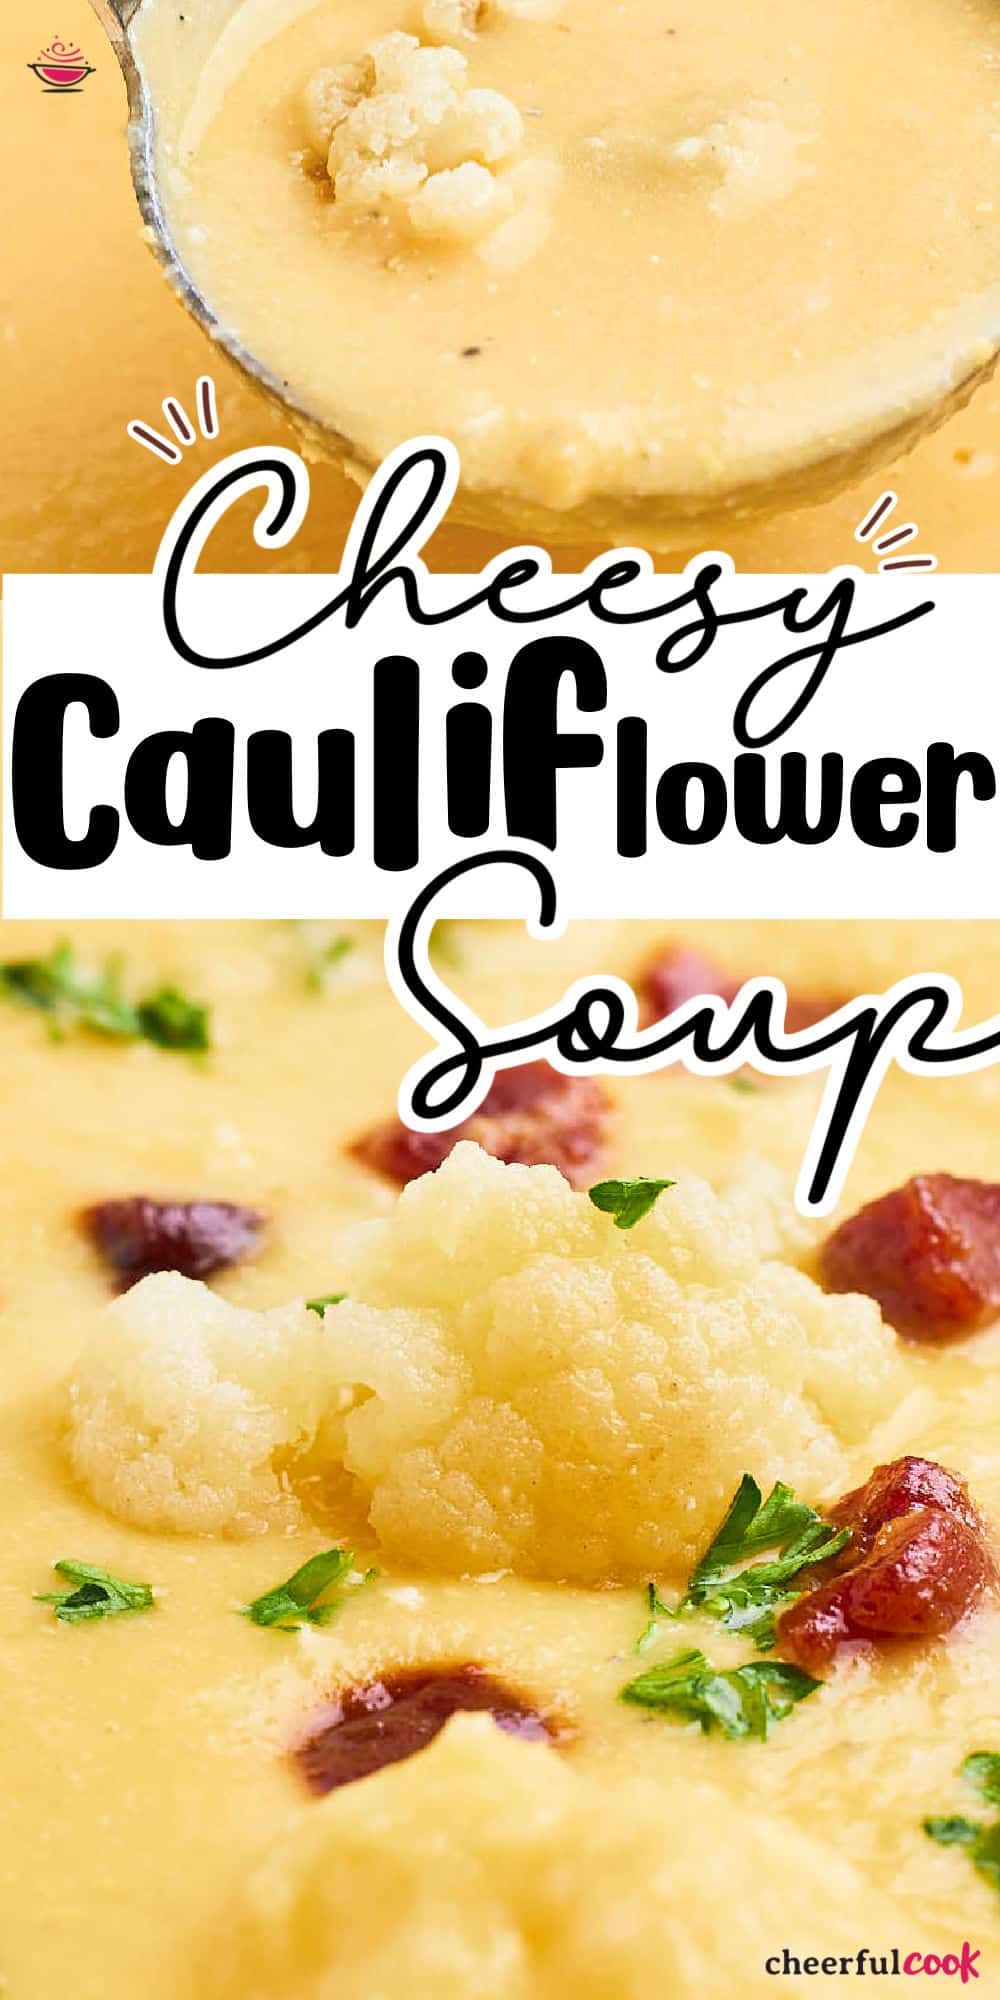 Looking for a tasty and fast way to get cozy? Our delicious limited-ingredient cauliflower soup is here! You can choose how you want it; blended, smooth, or chunky. Make the perfect bowlful in no time - just warm up, eat up and enjoy !#cheerfulcook #cauliflowersoup #soup #souprecipe #cheesy #cauliflowercheddar #soup #cheesy #easy via @cheerfulcook